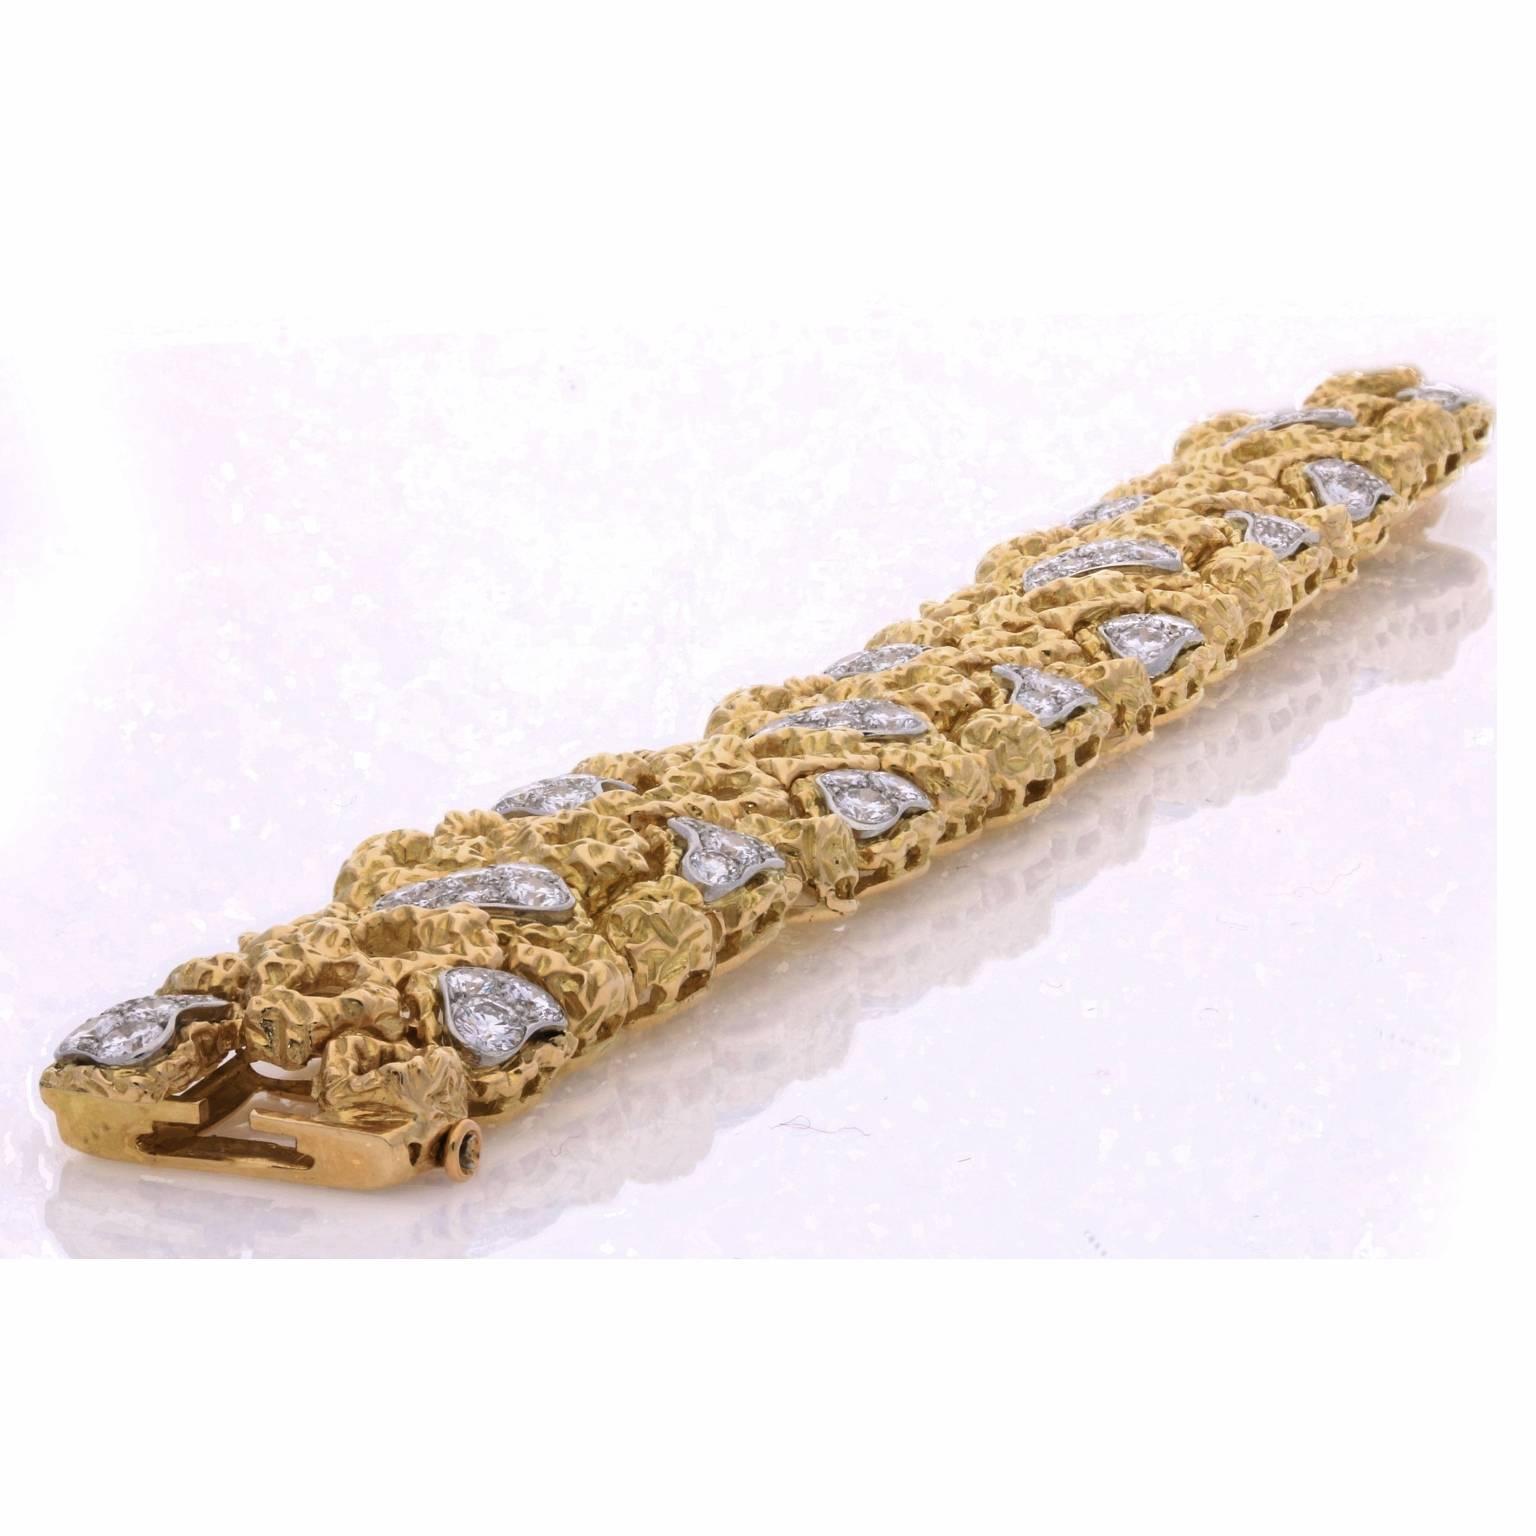 The stylish bracelet in heavily textured 18ct gold and of openwork, articulated panel design composed of a repeating pattern of irregular off-round motifs some of which are pavé set with round brilliant cut diamonds to a concealed tongue and box